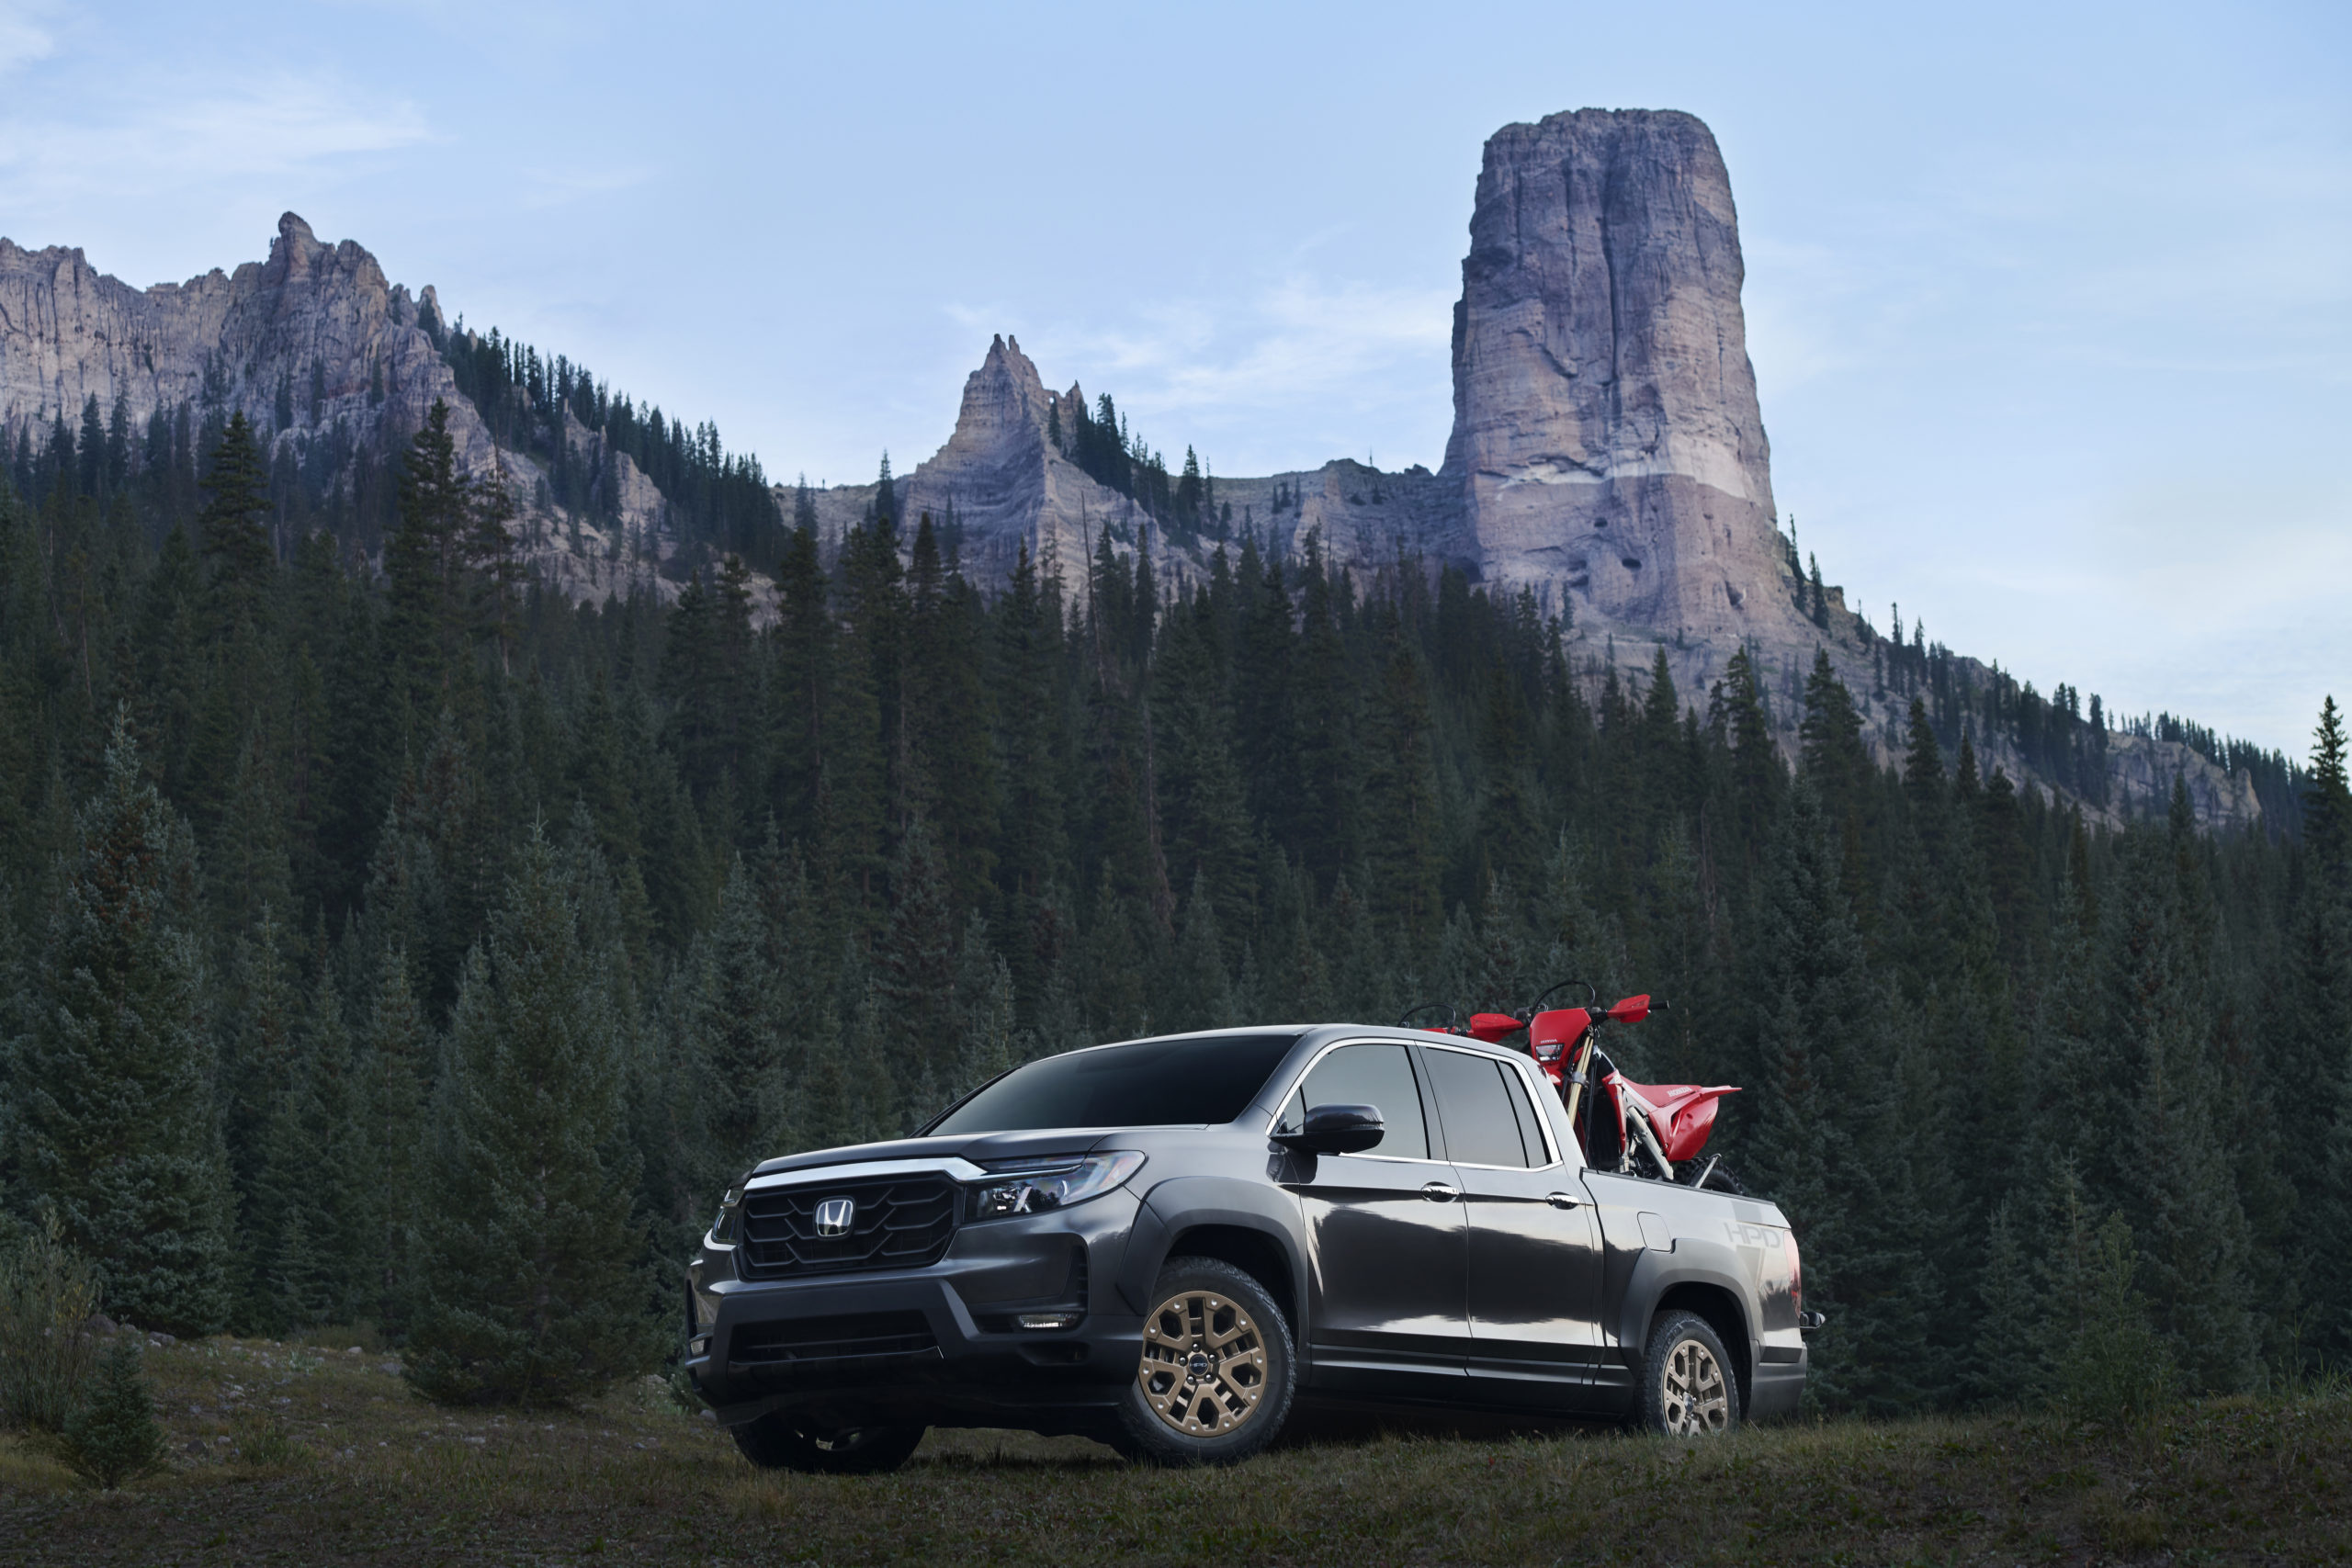 Honda Ridgeline, Unavailable in South Africa, Top-of-the-line pick-up, Unmatched performance, 2560x1710 HD Desktop